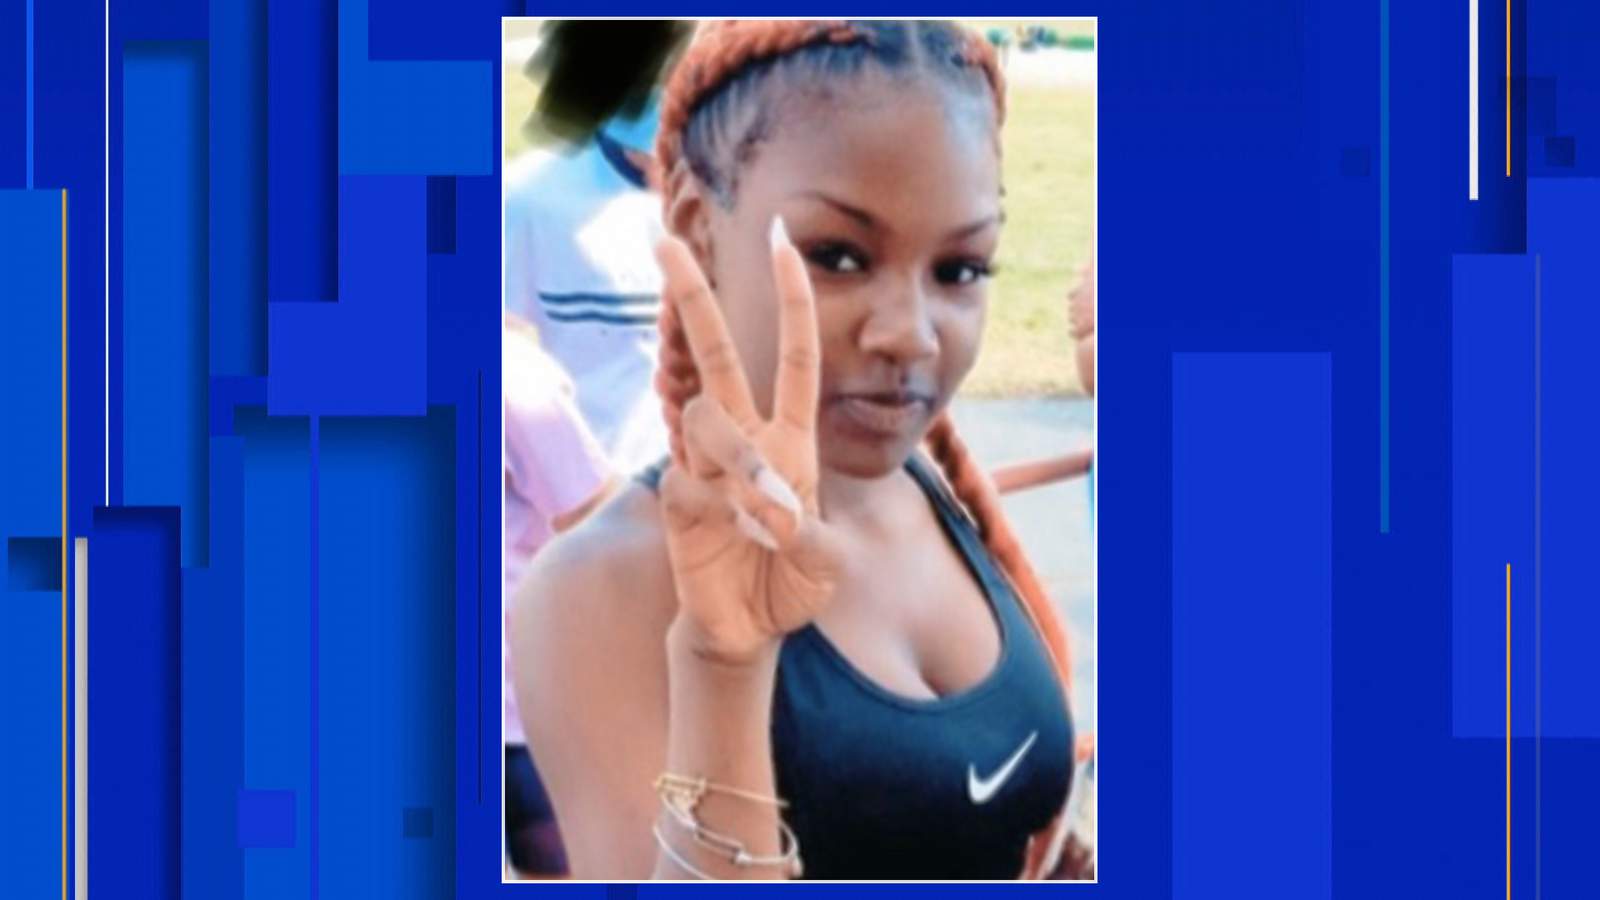 Detroit police seek missing 13-year-old girl believed to have run away from home